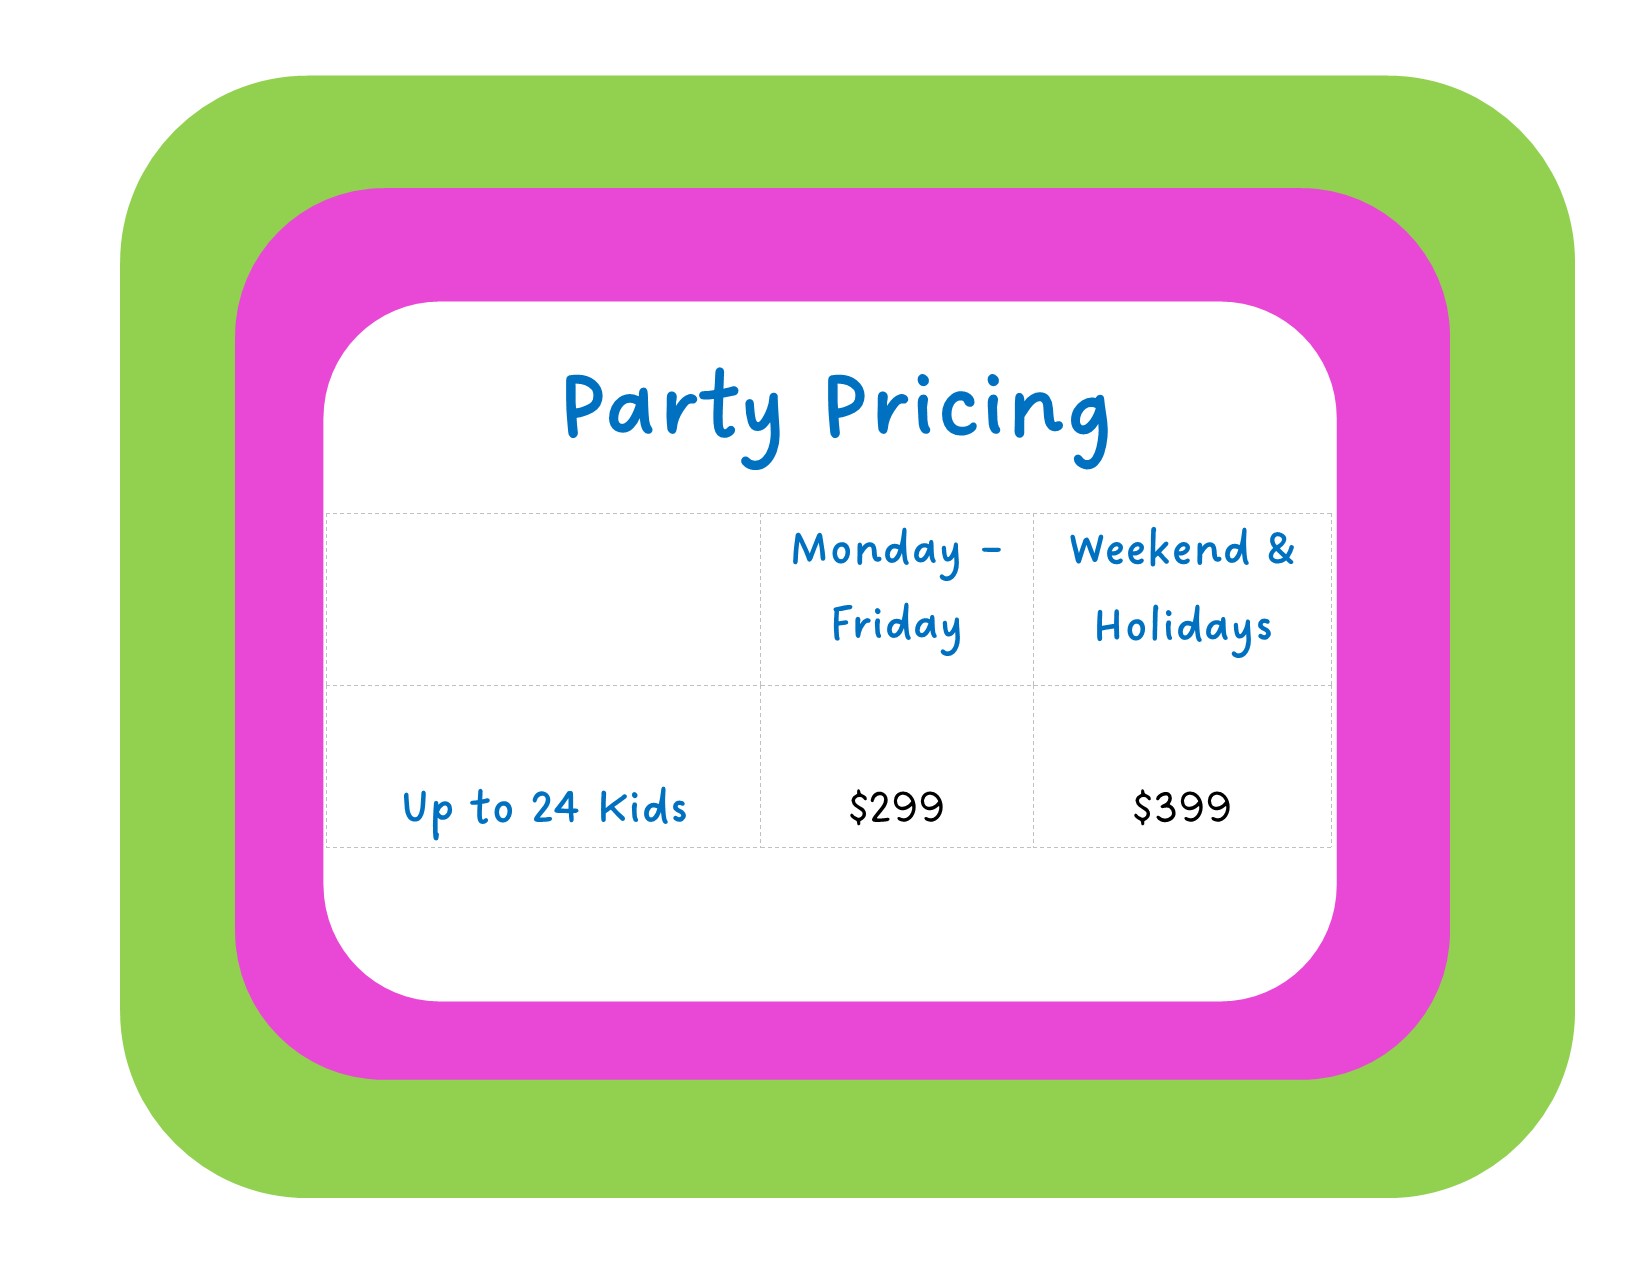 Party Package Pricing